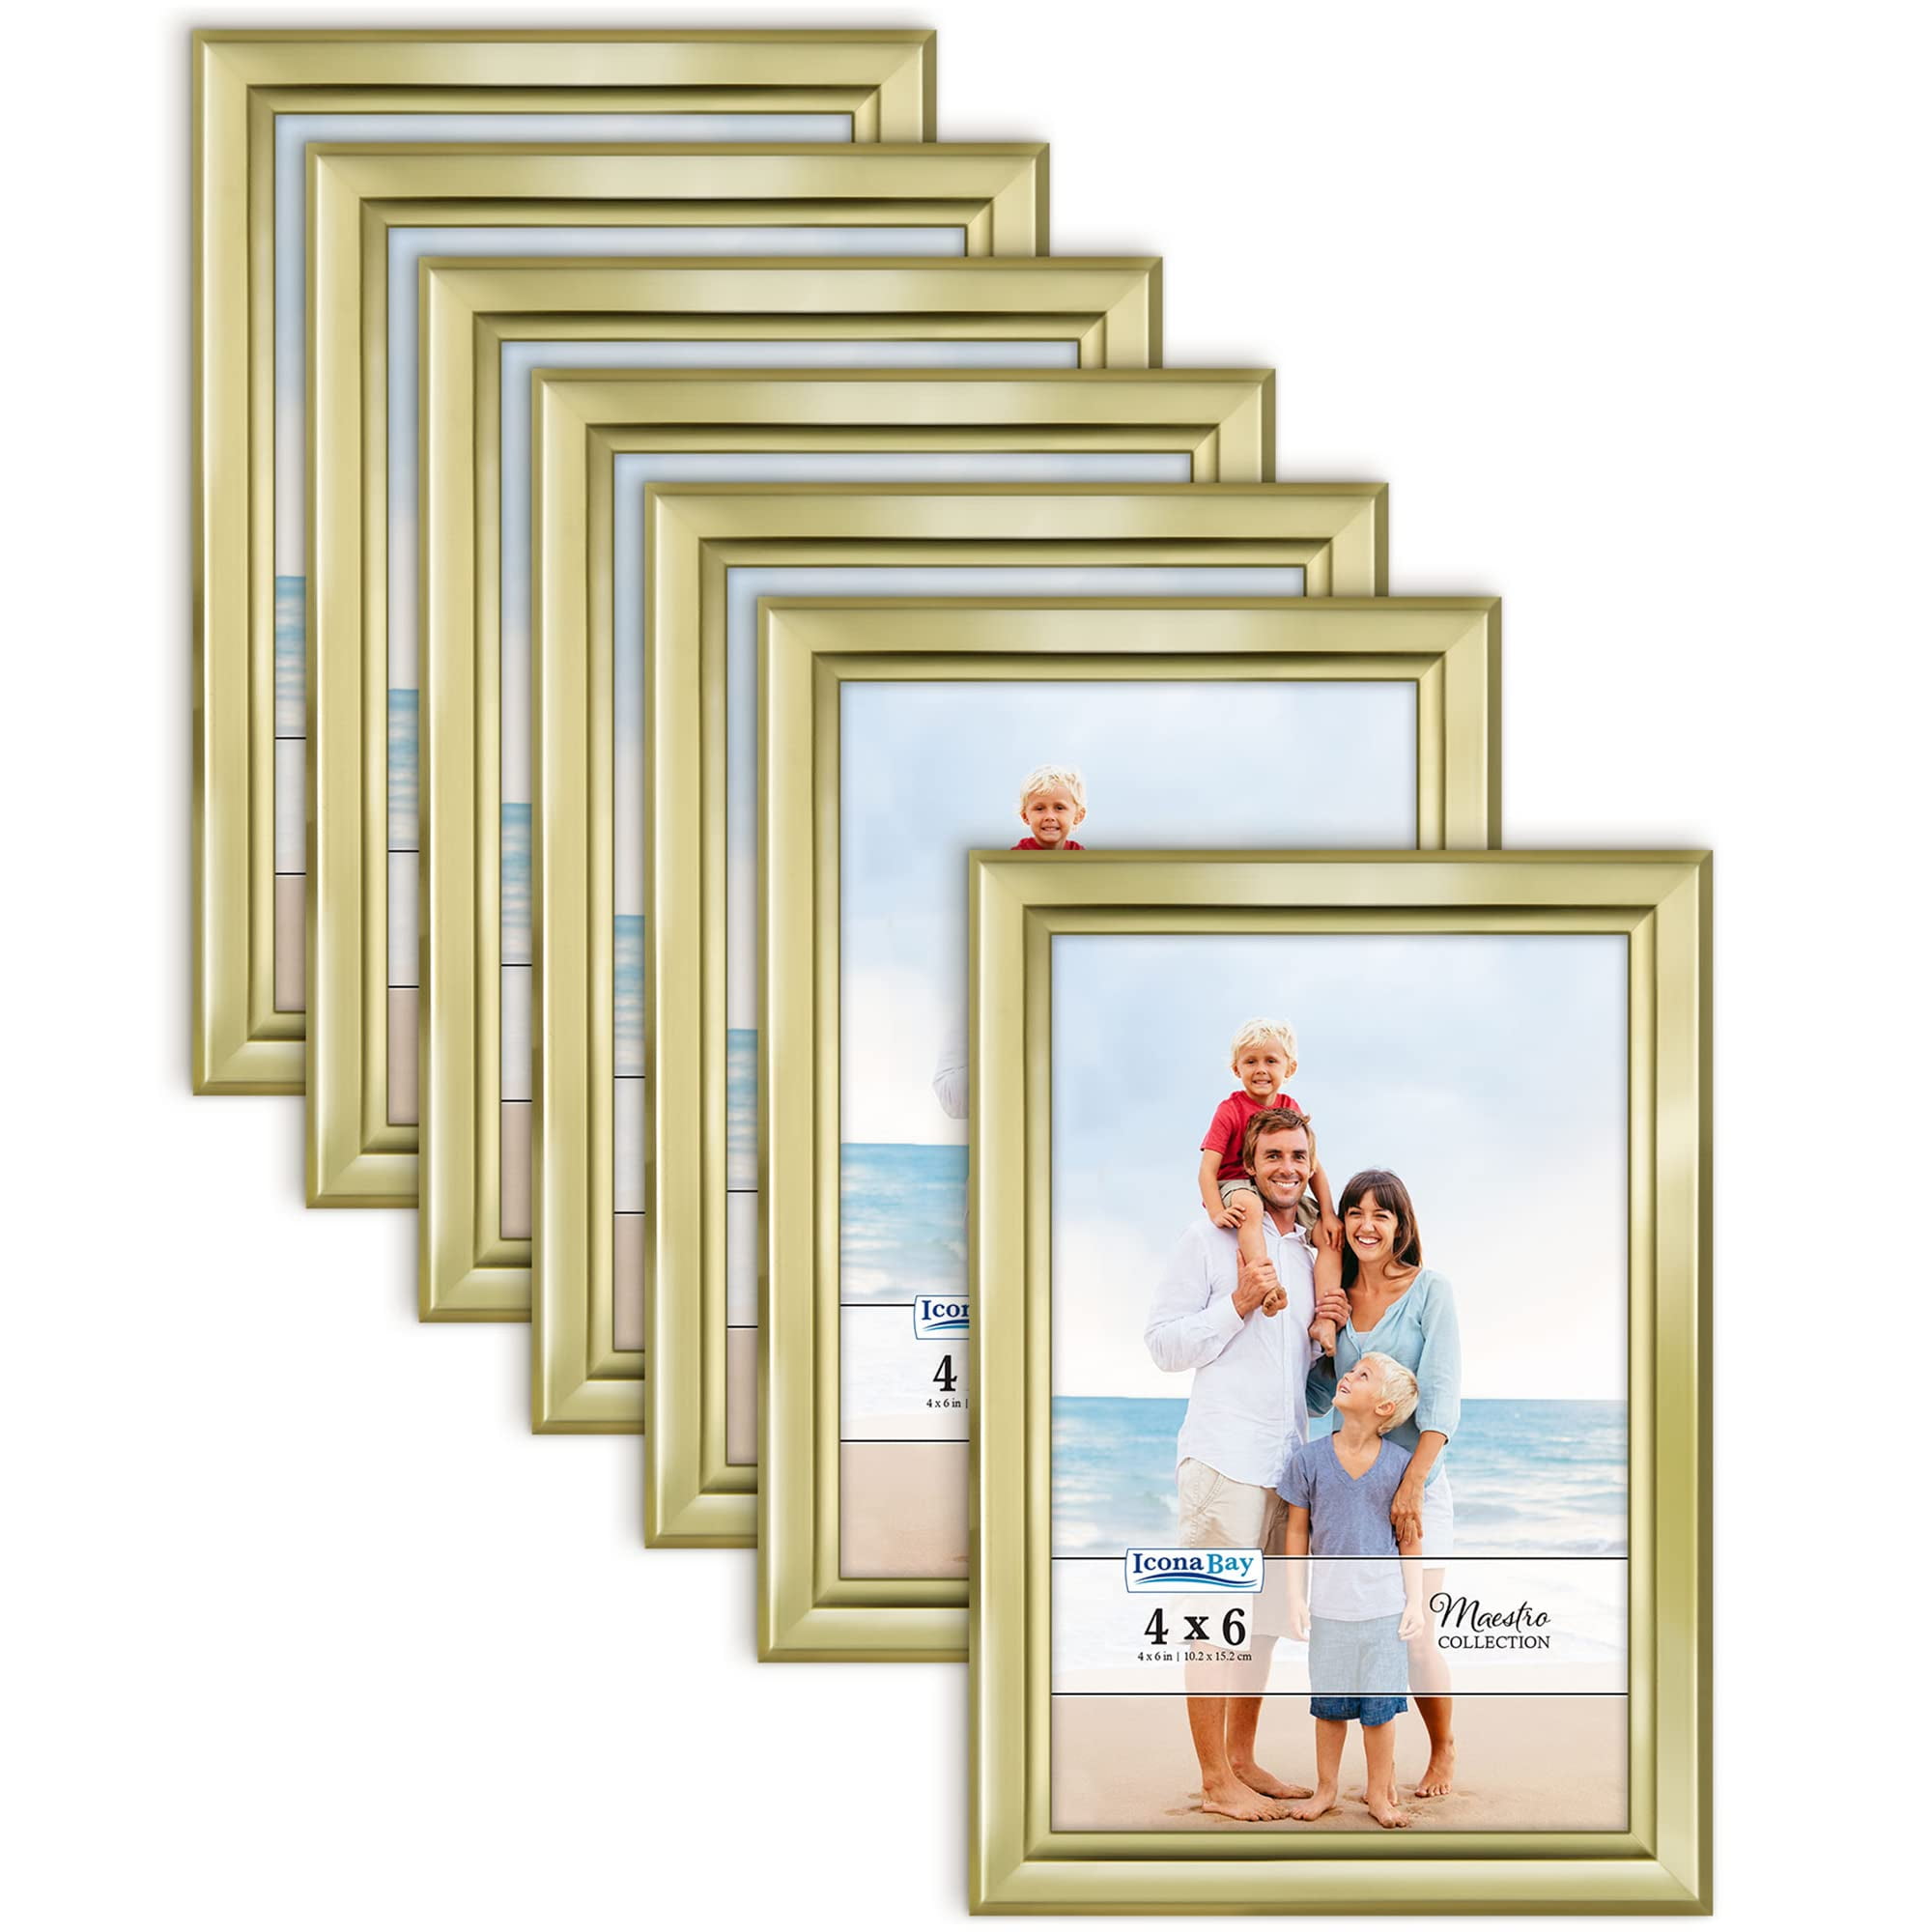 Buy 4x4 inches Photo Frame In Metallic Golden Finish Online. COD. Low  Prices. Free Shipping. Premium Quality.